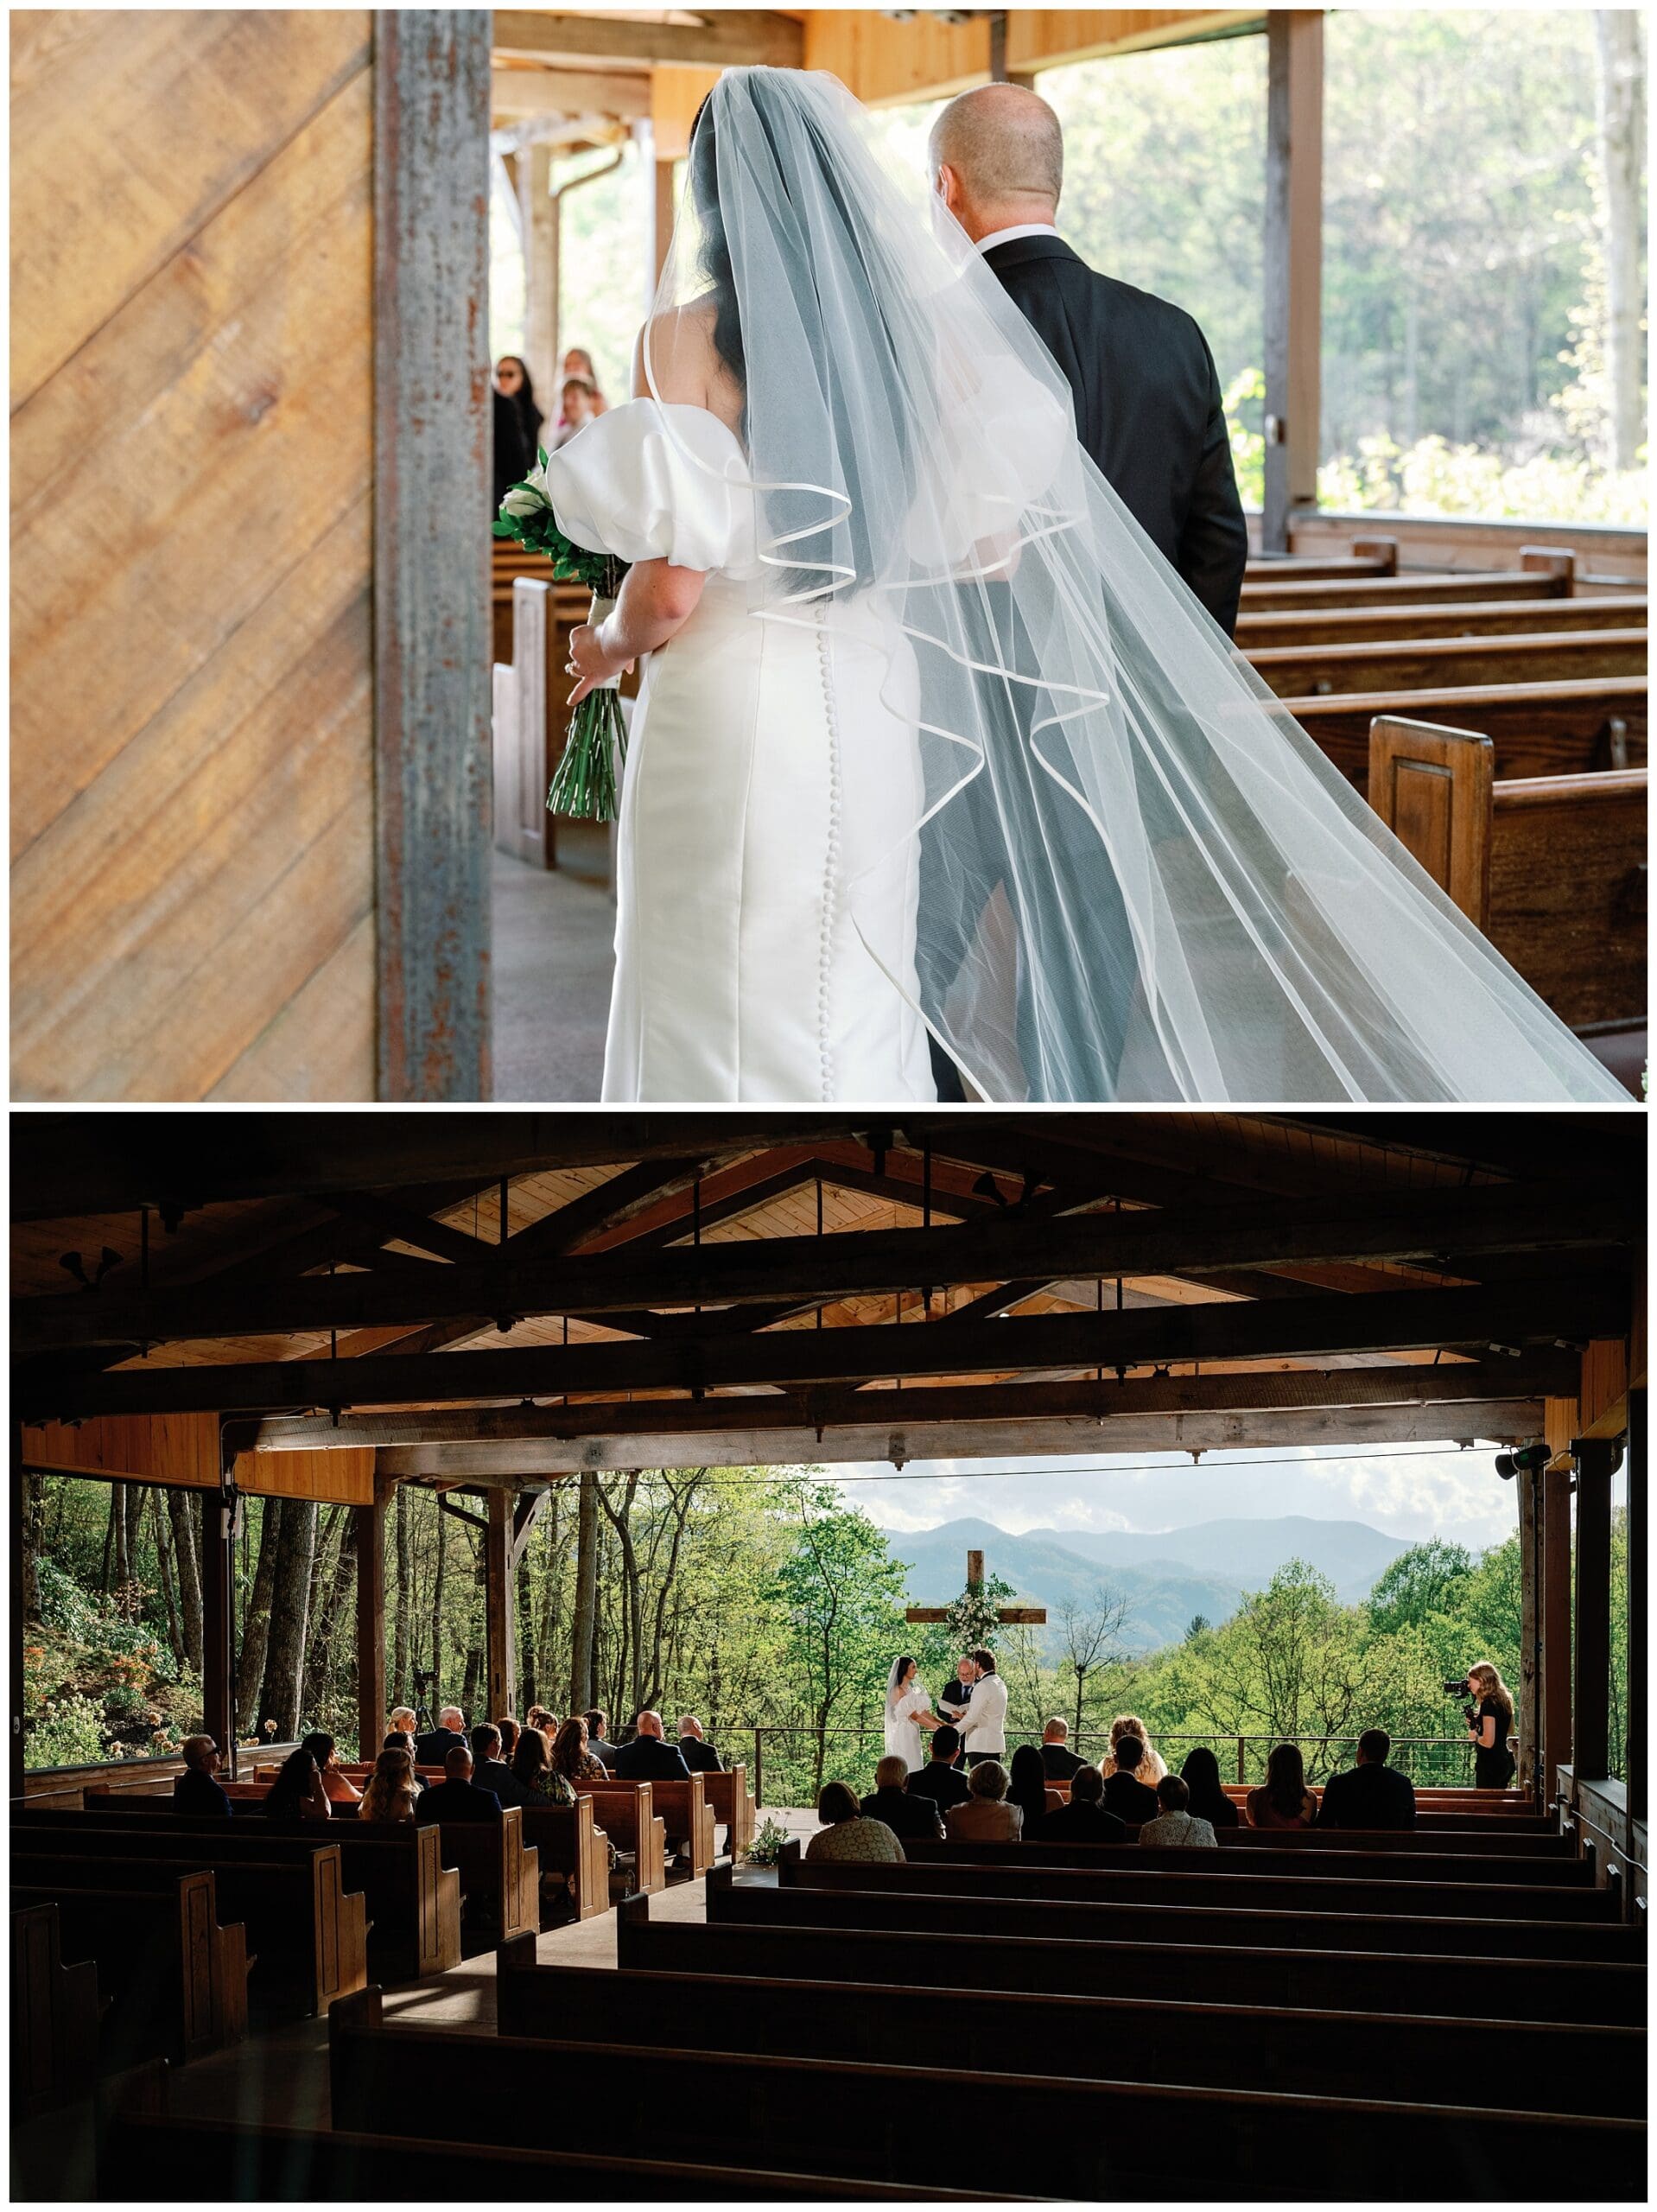 Top: bride and groom viewed from behind, entering a rustic, wood-lined chapel. bottom: wedding ceremony in a wooded pavilion with open sides, guests facing a mountain view.